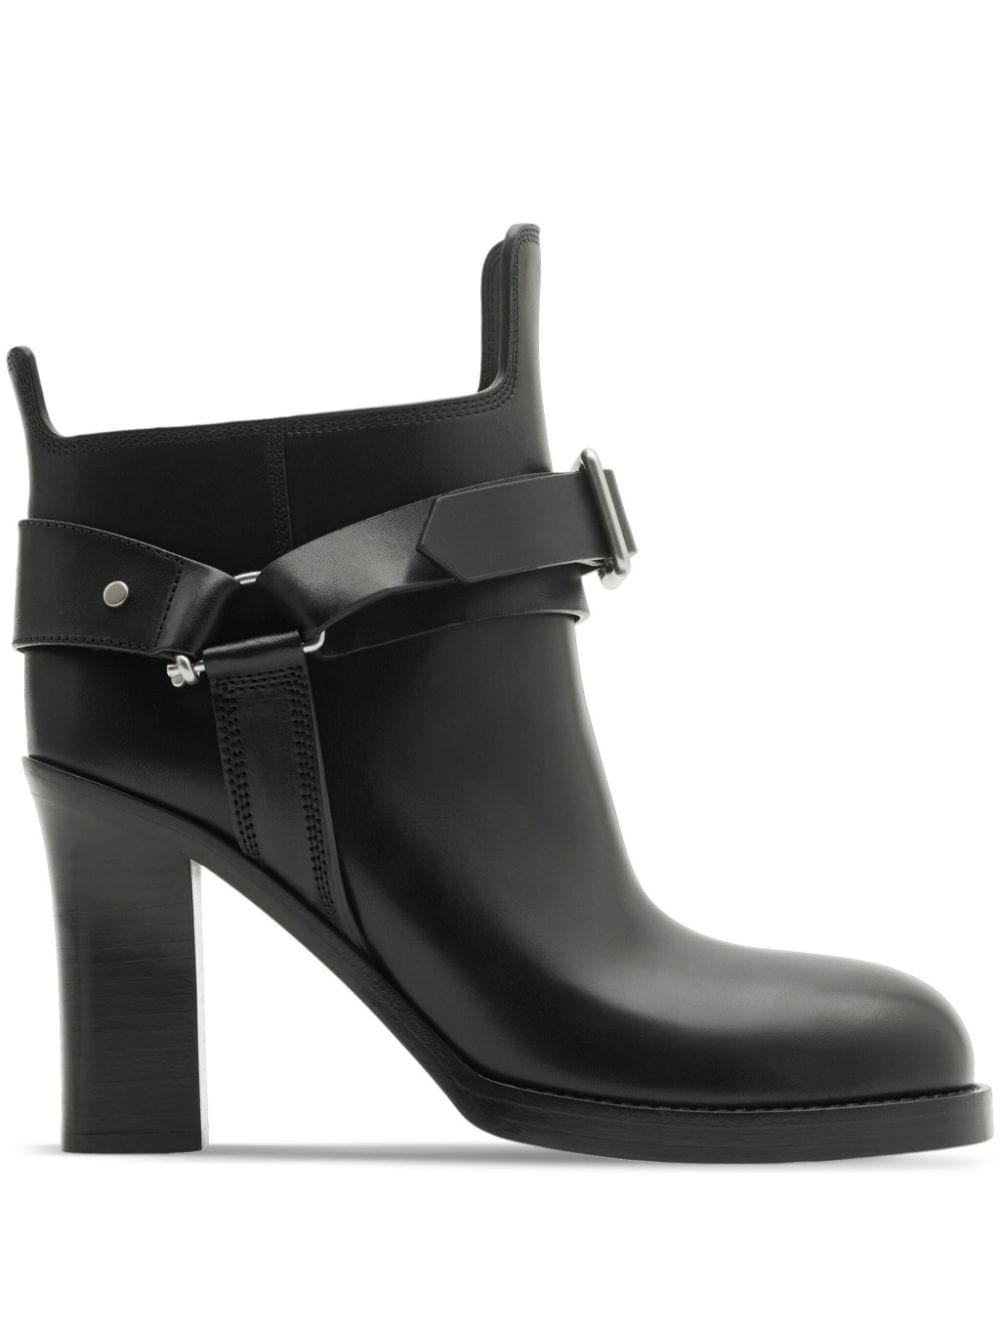 Burberry buckled 100mm leather ankle boots - Black von Burberry